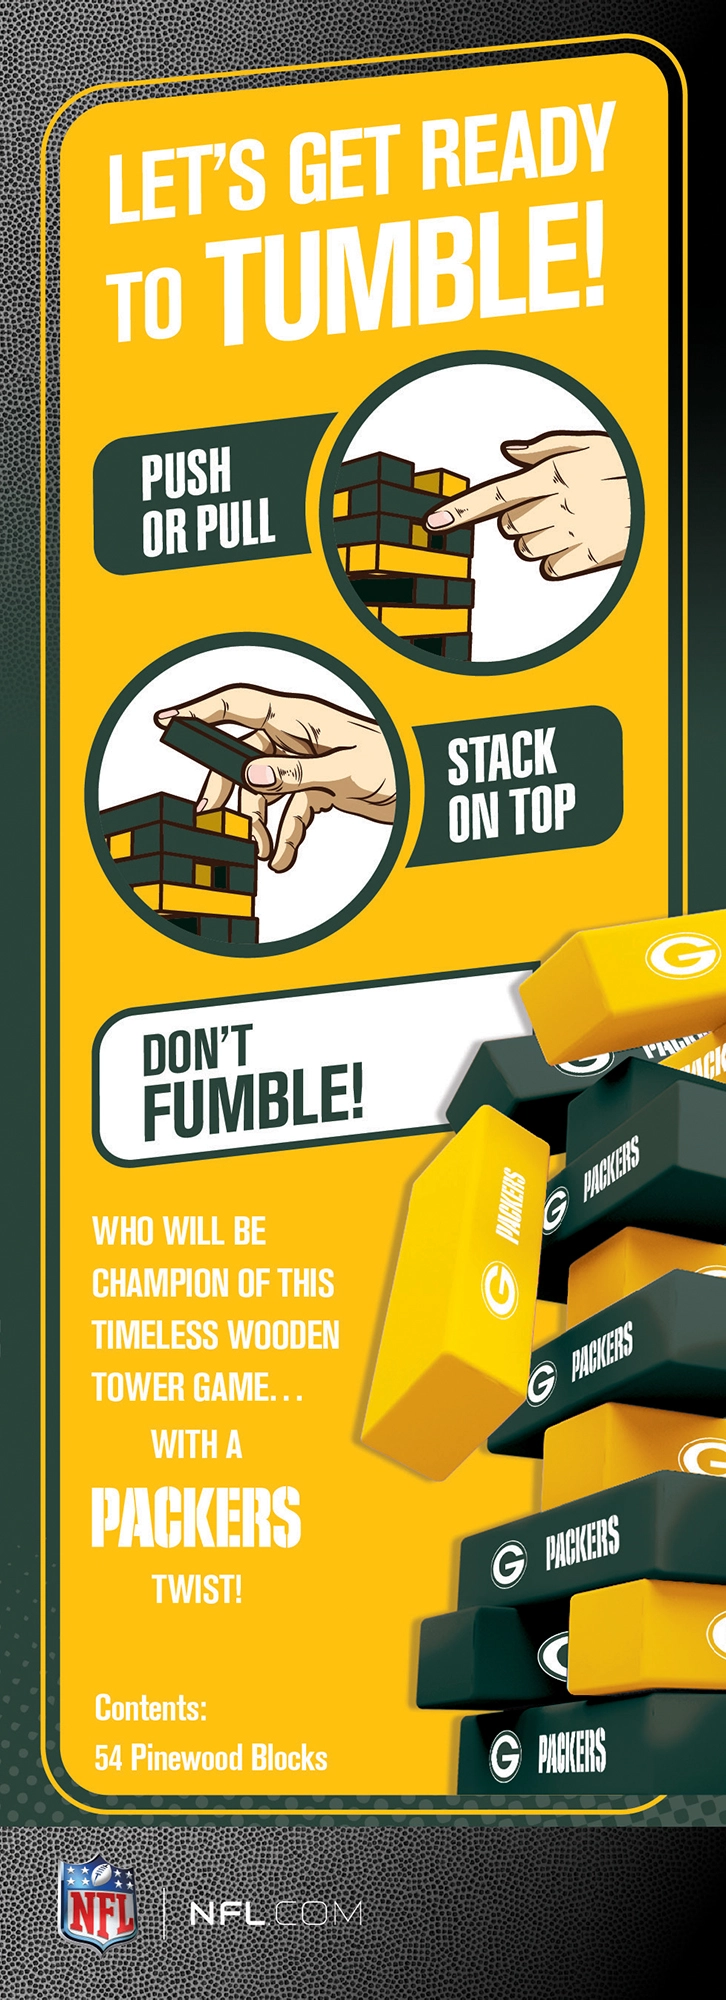 Green Bay Packers NFL Tumble Tower